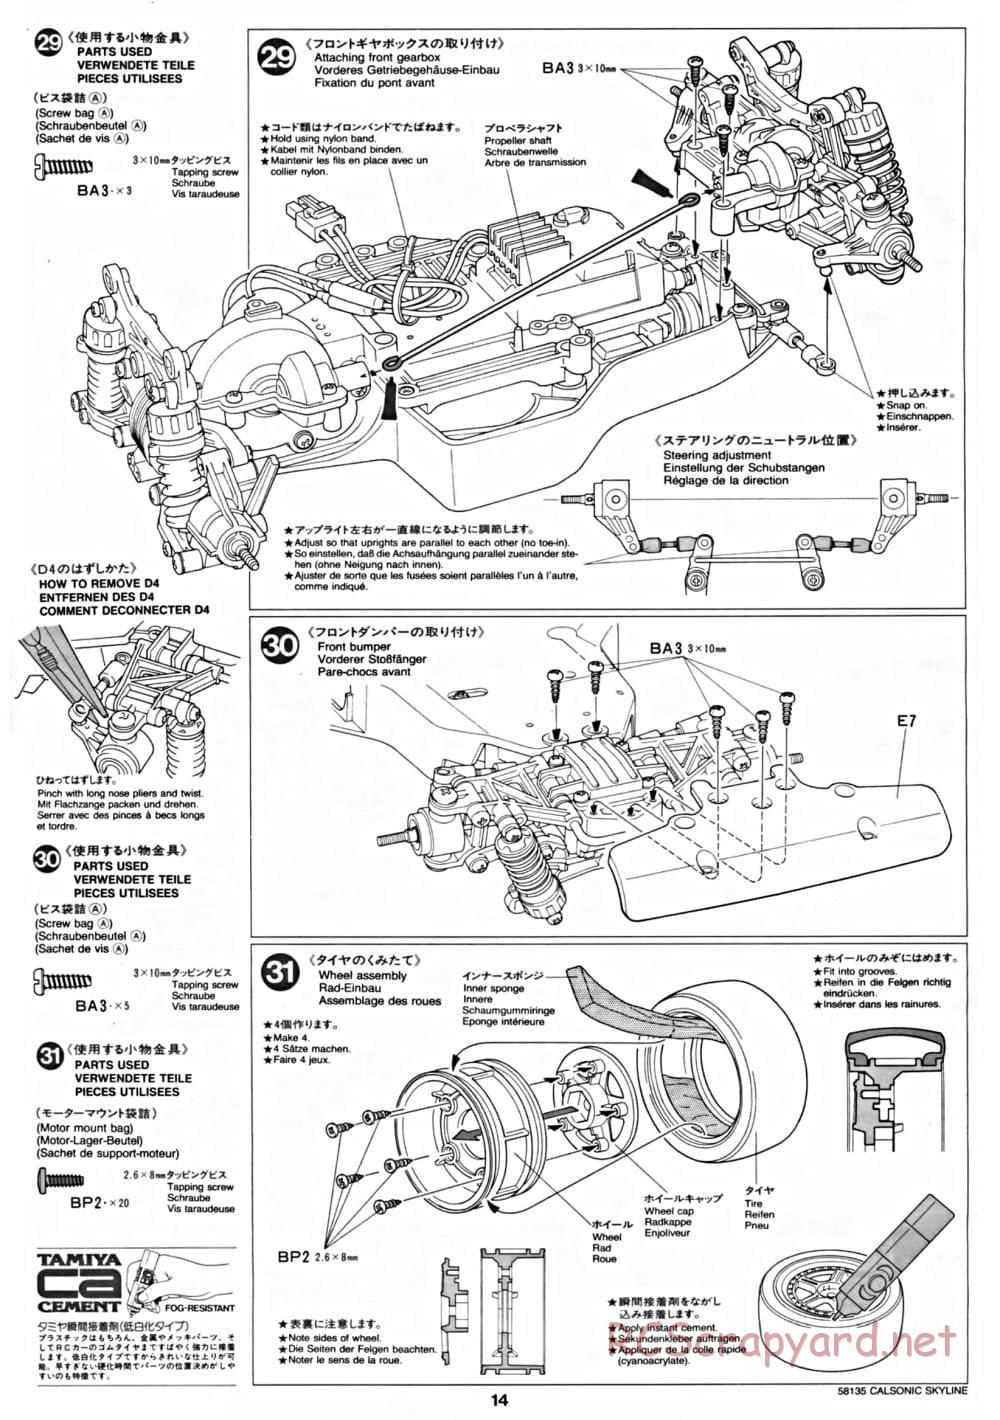 Tamiya - Calsonic Skyline GT-R Gr.A - TA-02 Chassis - Manual - Page 14